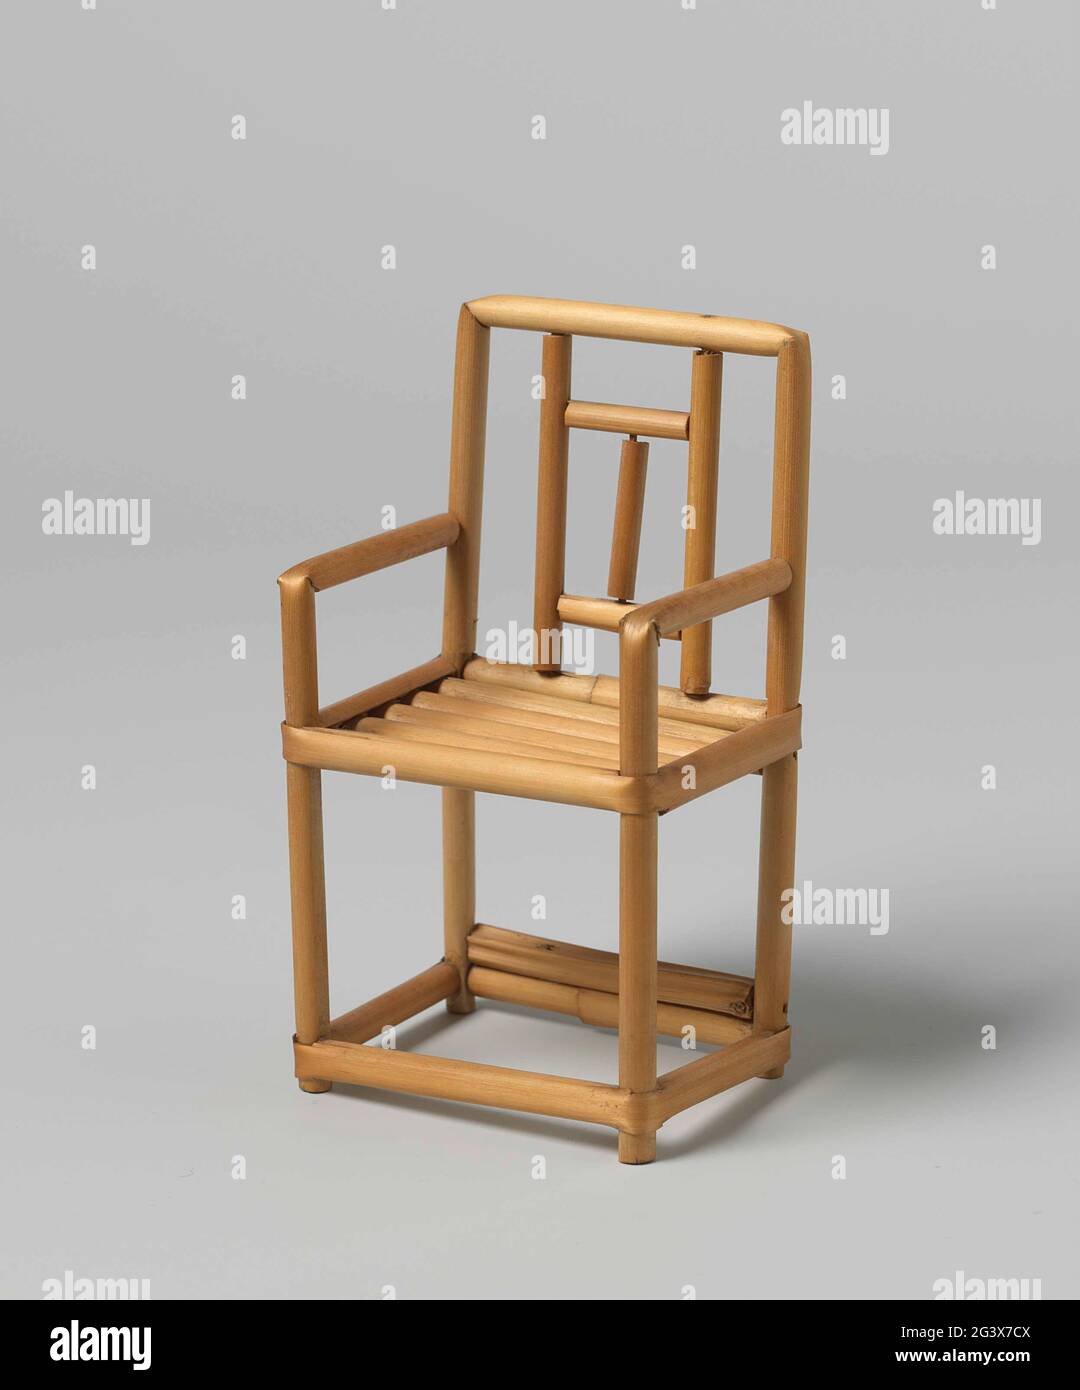 Chair of braid, with geometric motifs. Chair made from curved, and on wooden pennettes racing rod reeds. The backrest with geometric motifs. The legs are interconnected with cross rules. The seat is made of five half reed bars confirmed in the width. Stock Photo